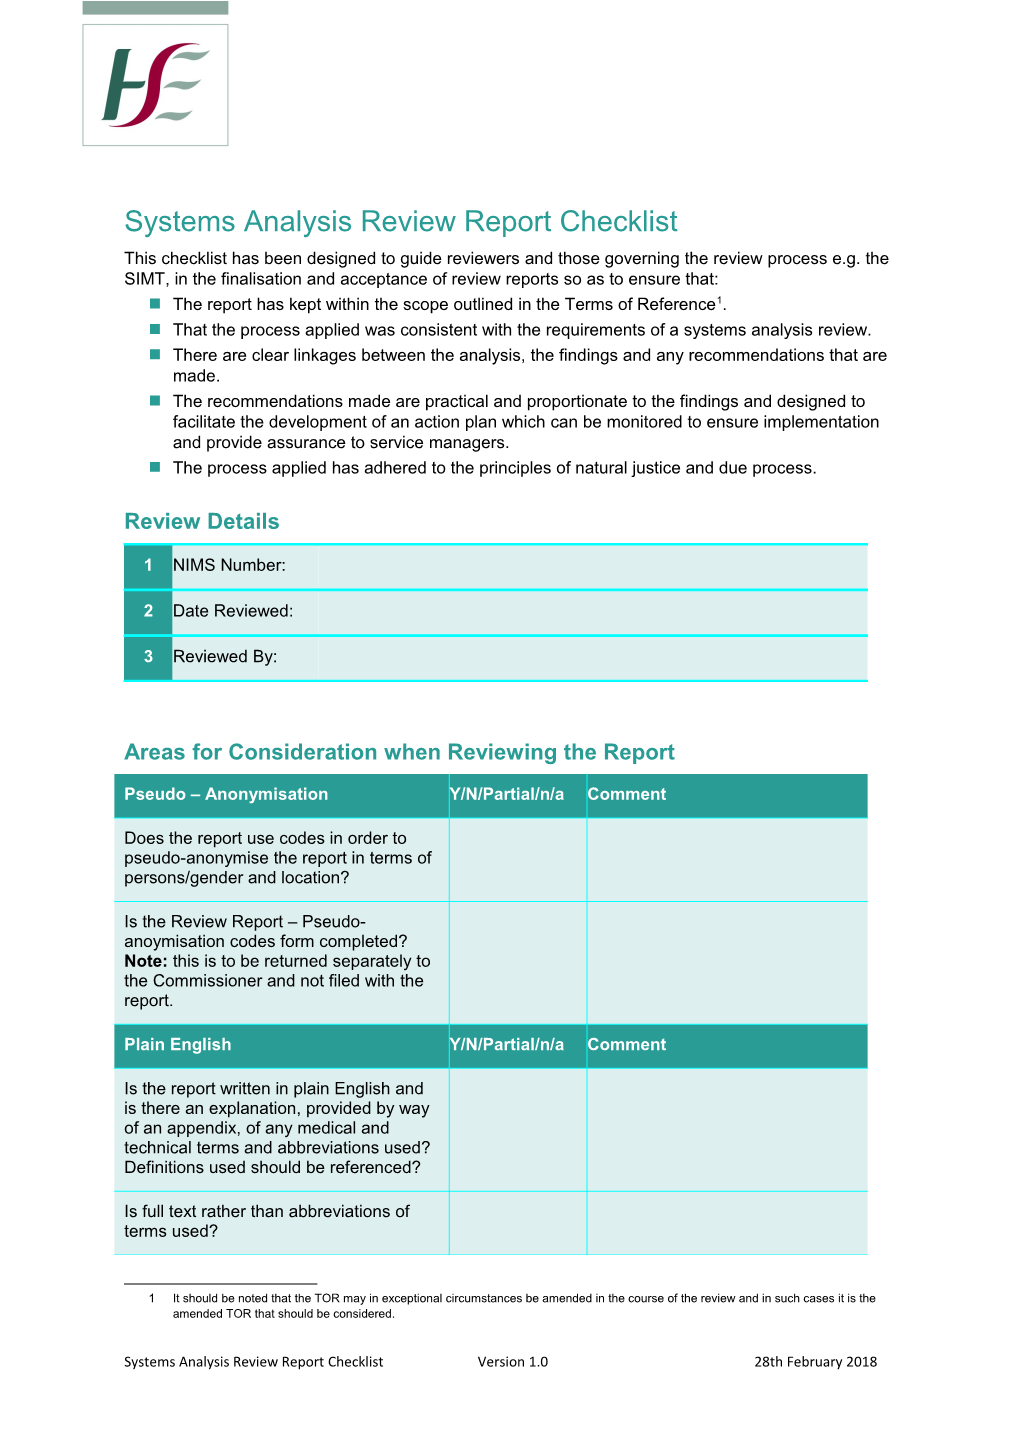 Systems Analysis Review Report Checklist